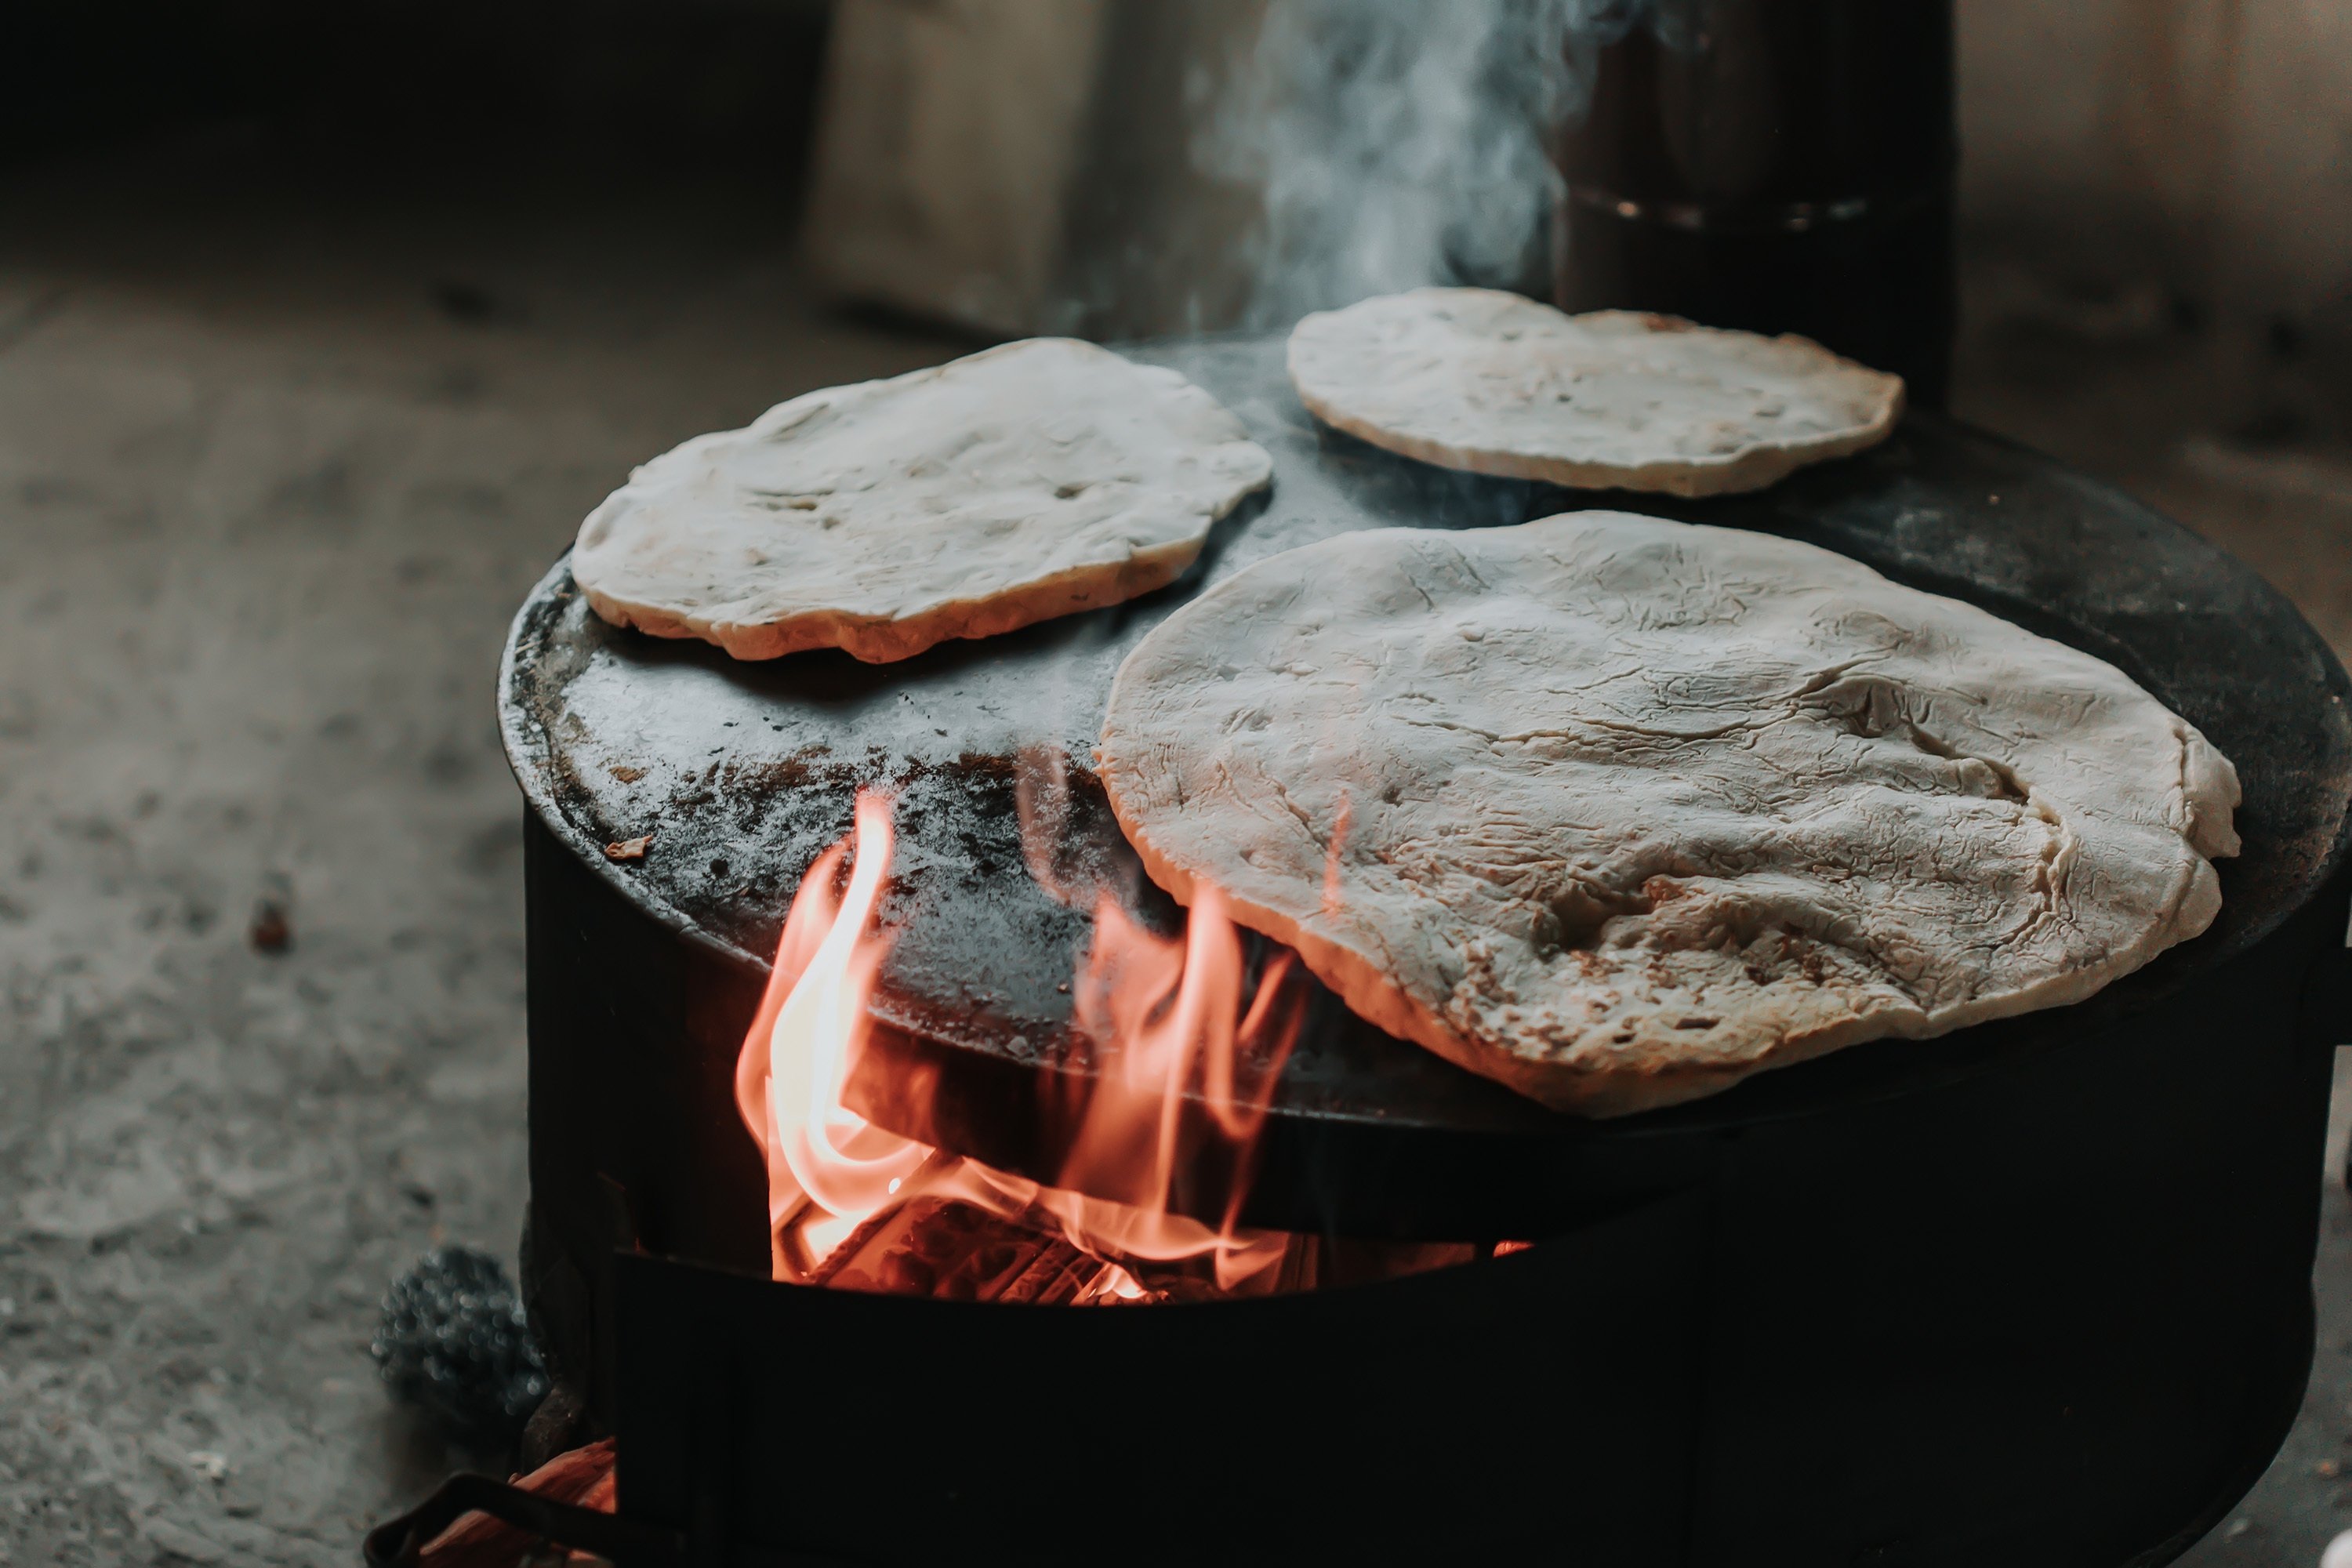 Breads such as lavaş or bazlama are cooked on shallow metal domes called "sac" over a roaring fire. (Shutterstock Photo)